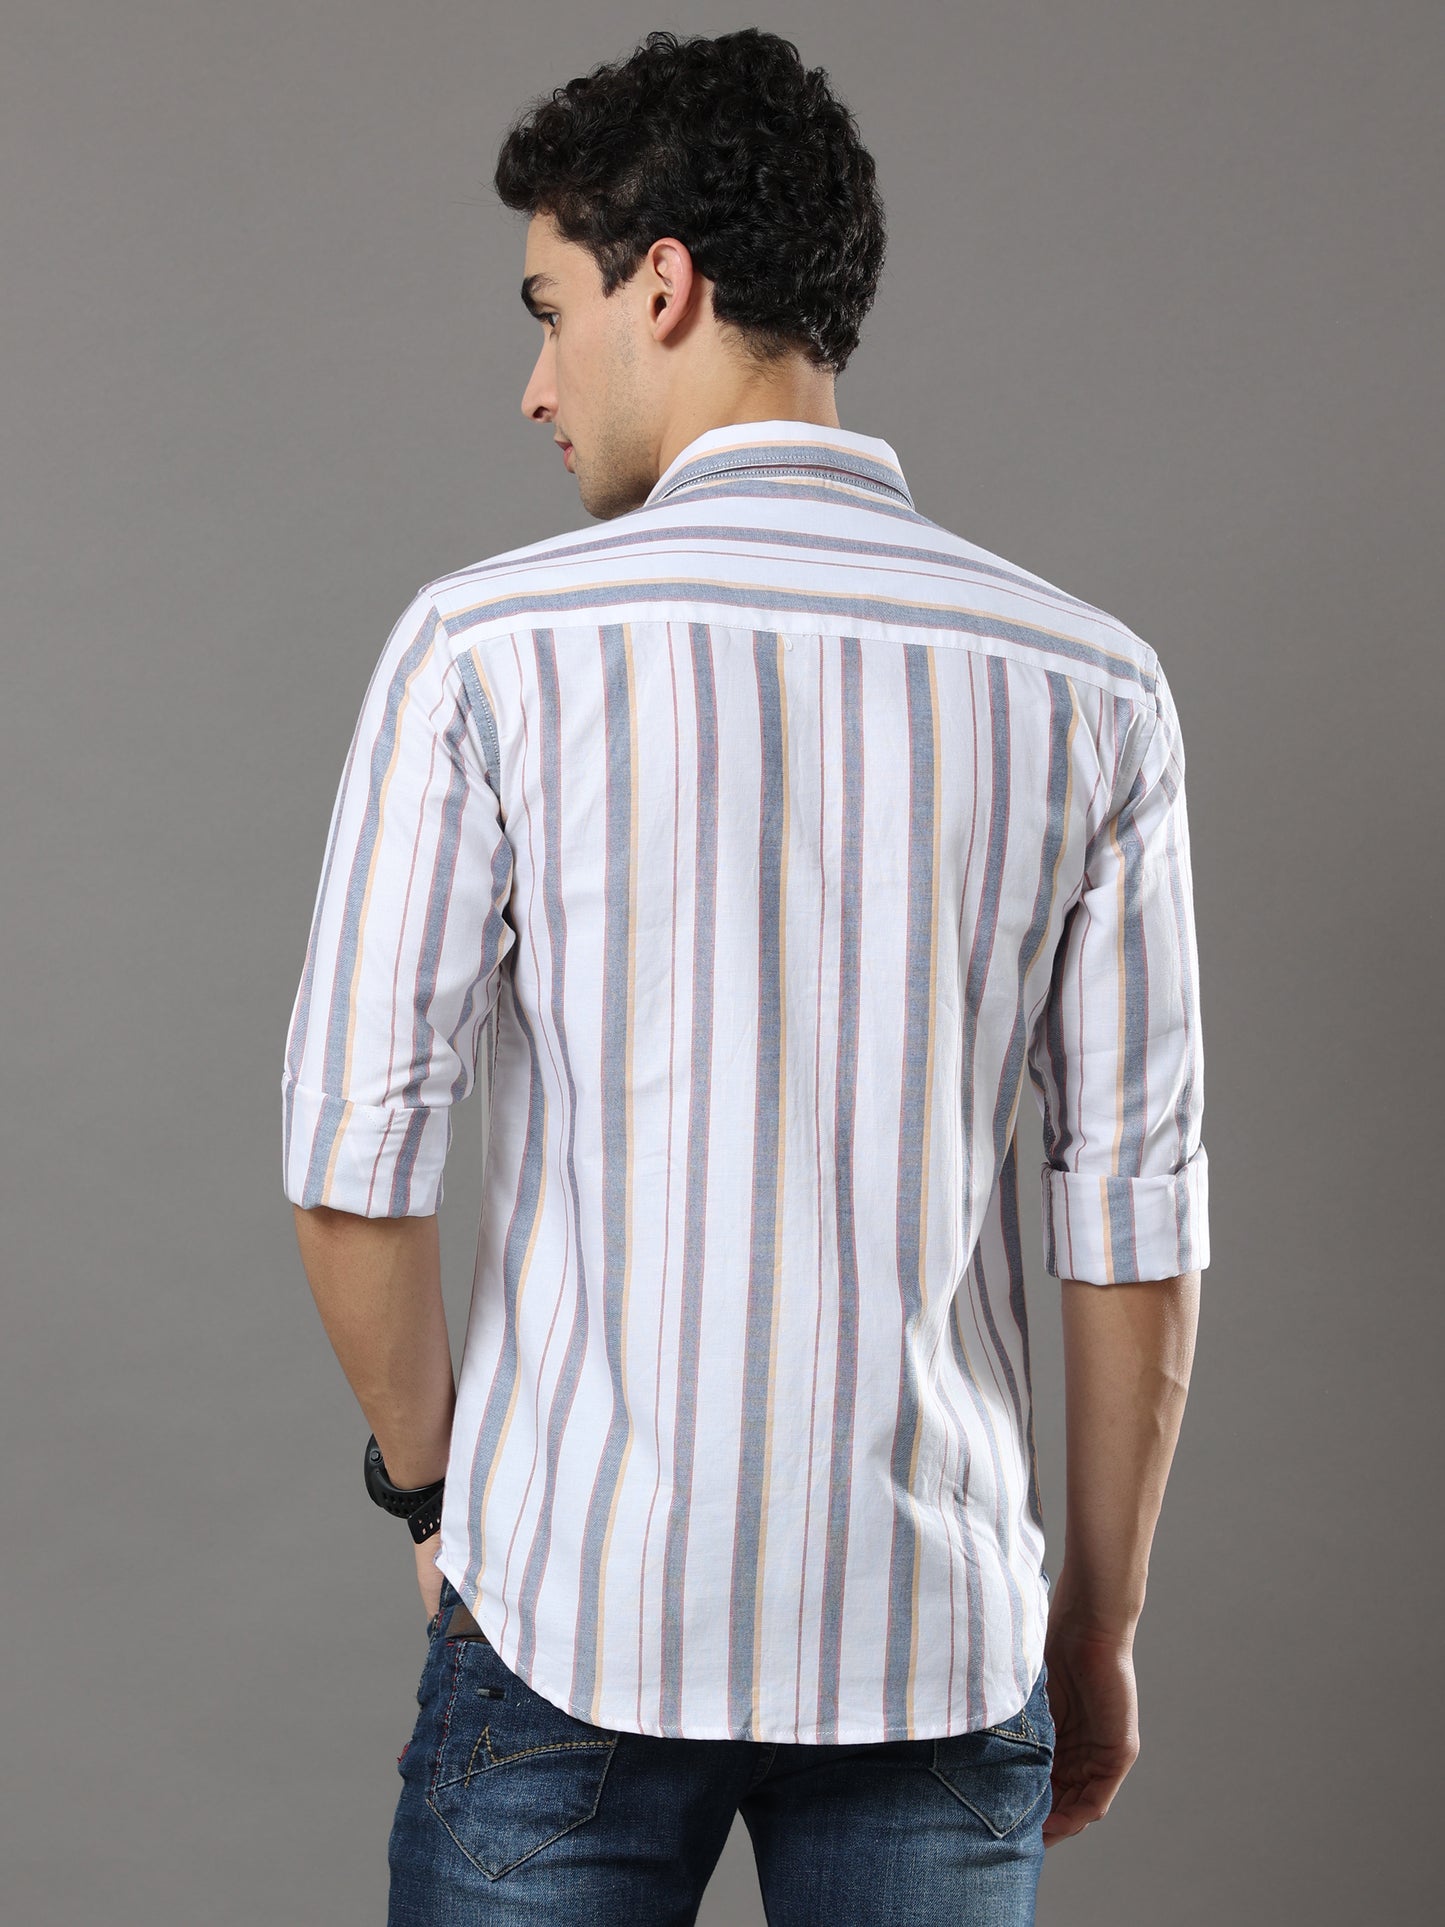 White And Grey Stripes Shirt